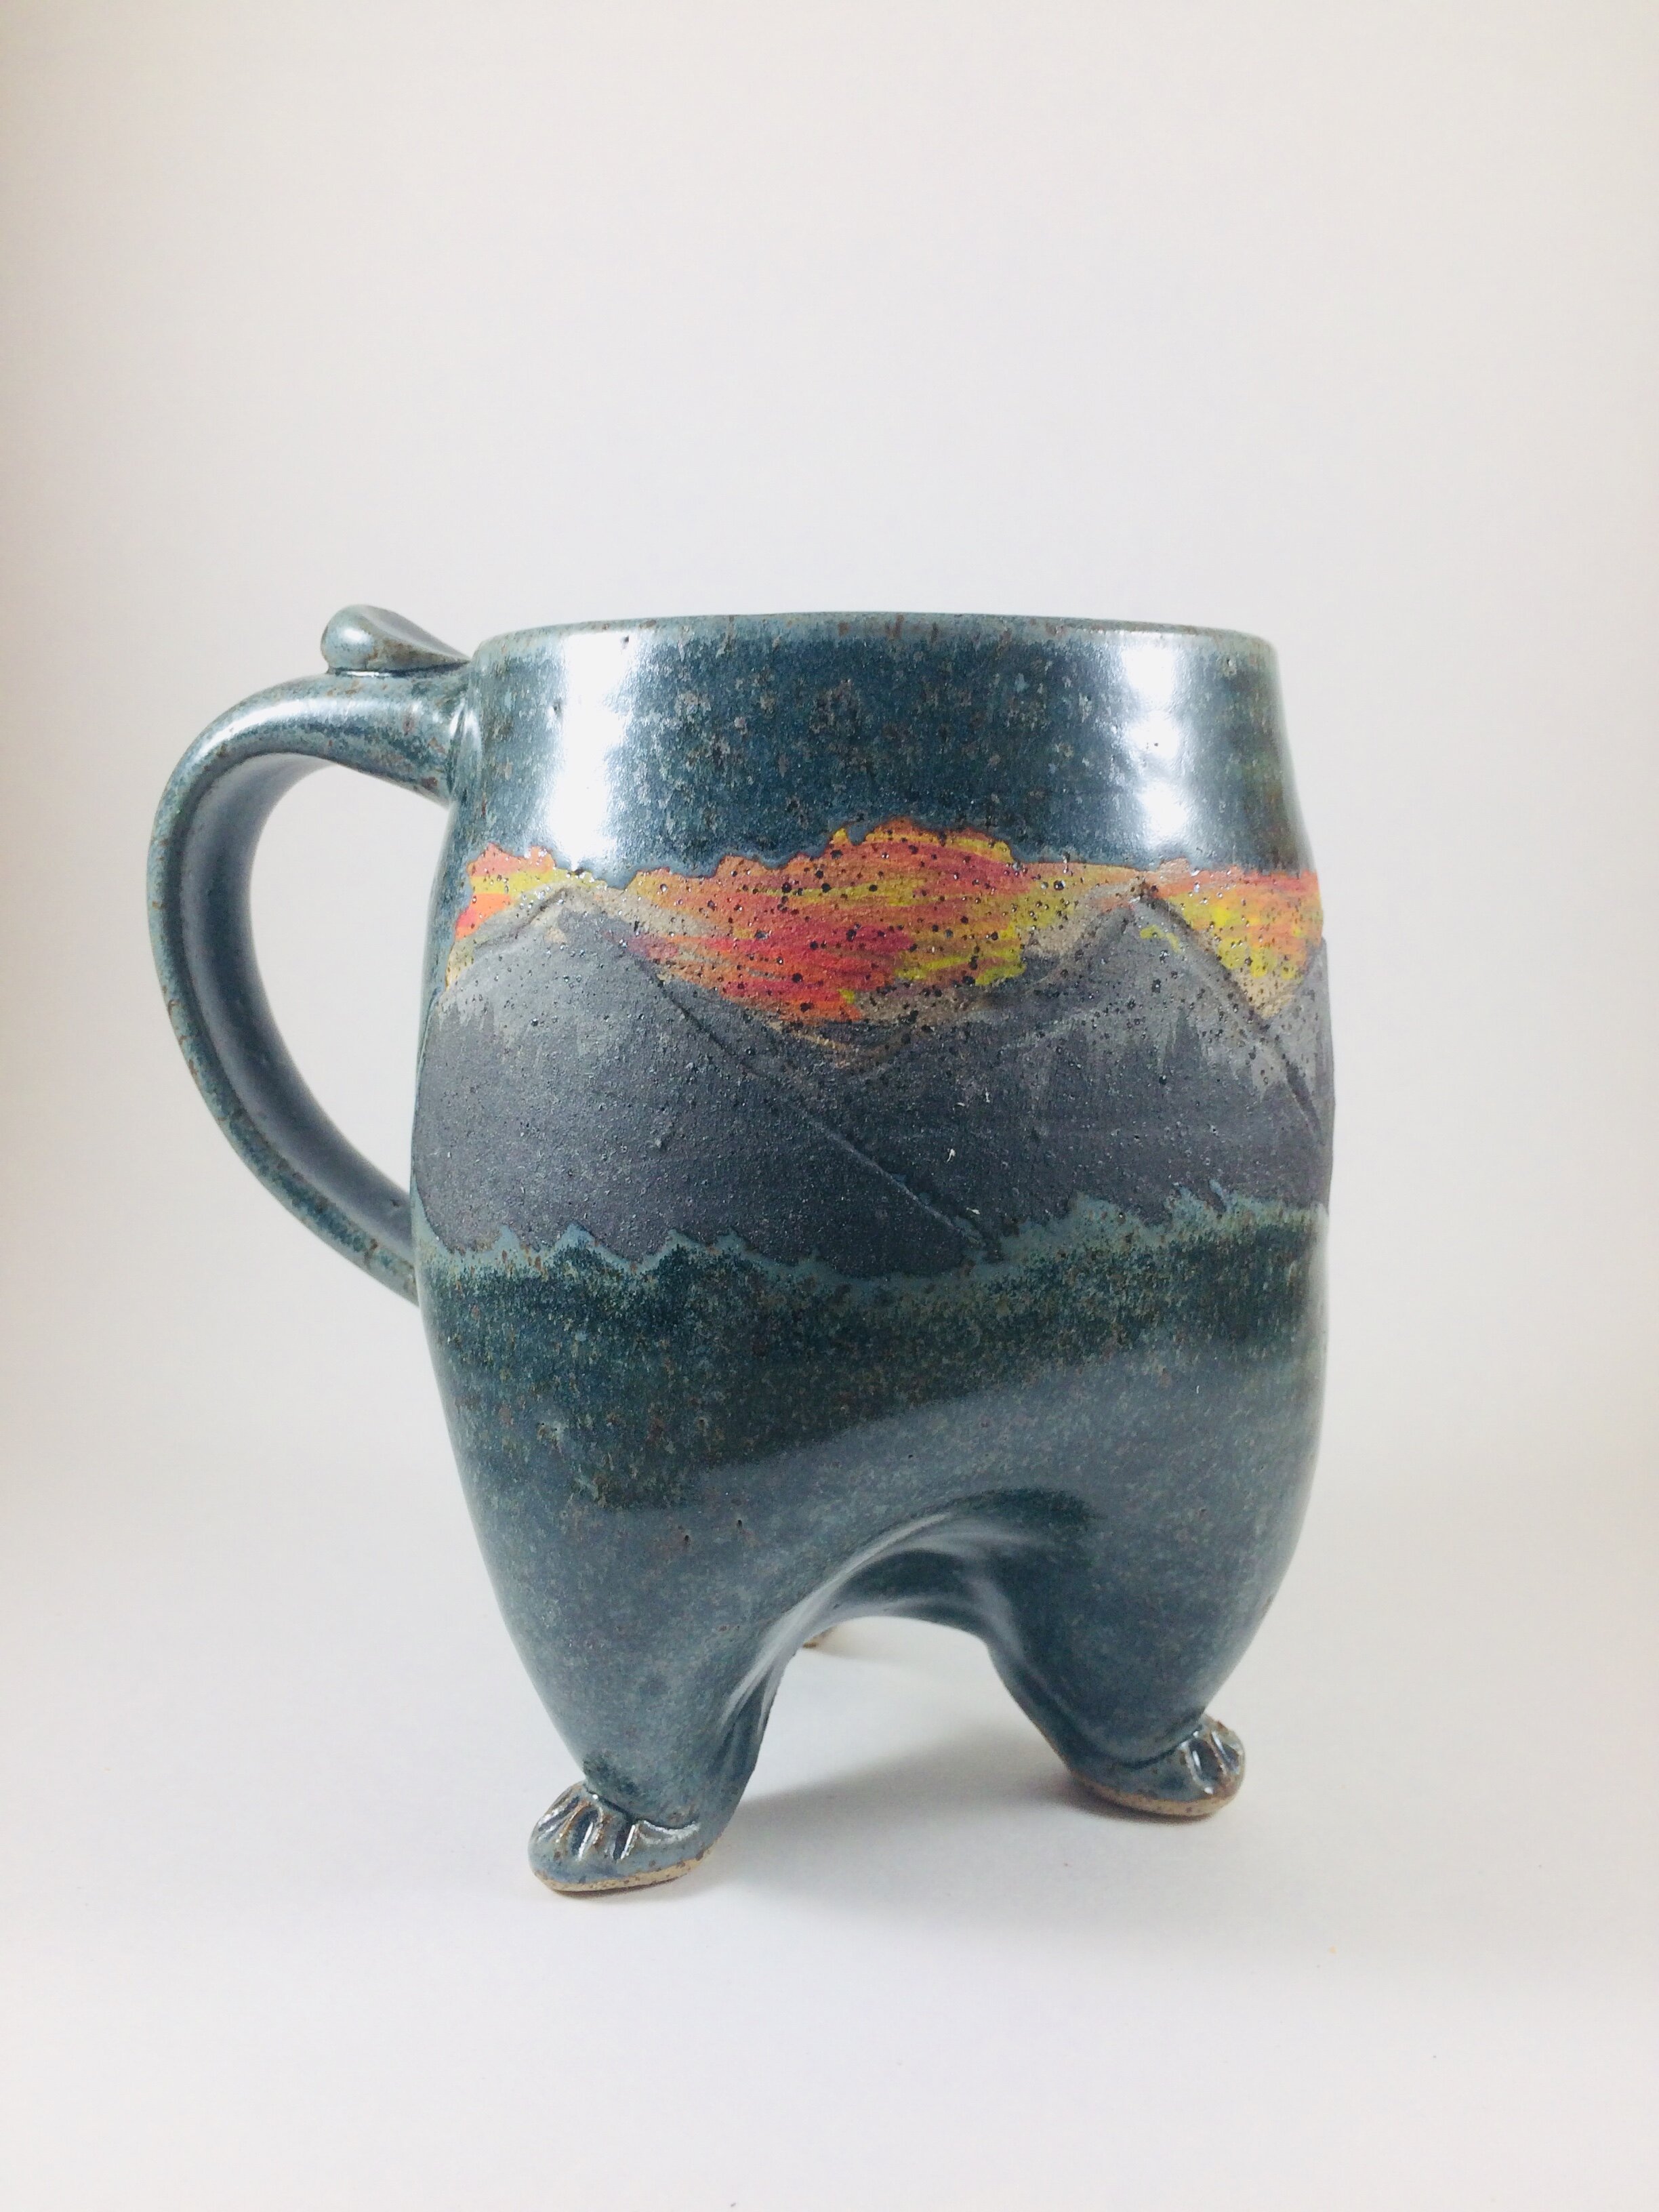 Mountain Pattern Footed Mug handcrafted by Michael Gibbons of Nutfield Pottery, Derry, NH, USA